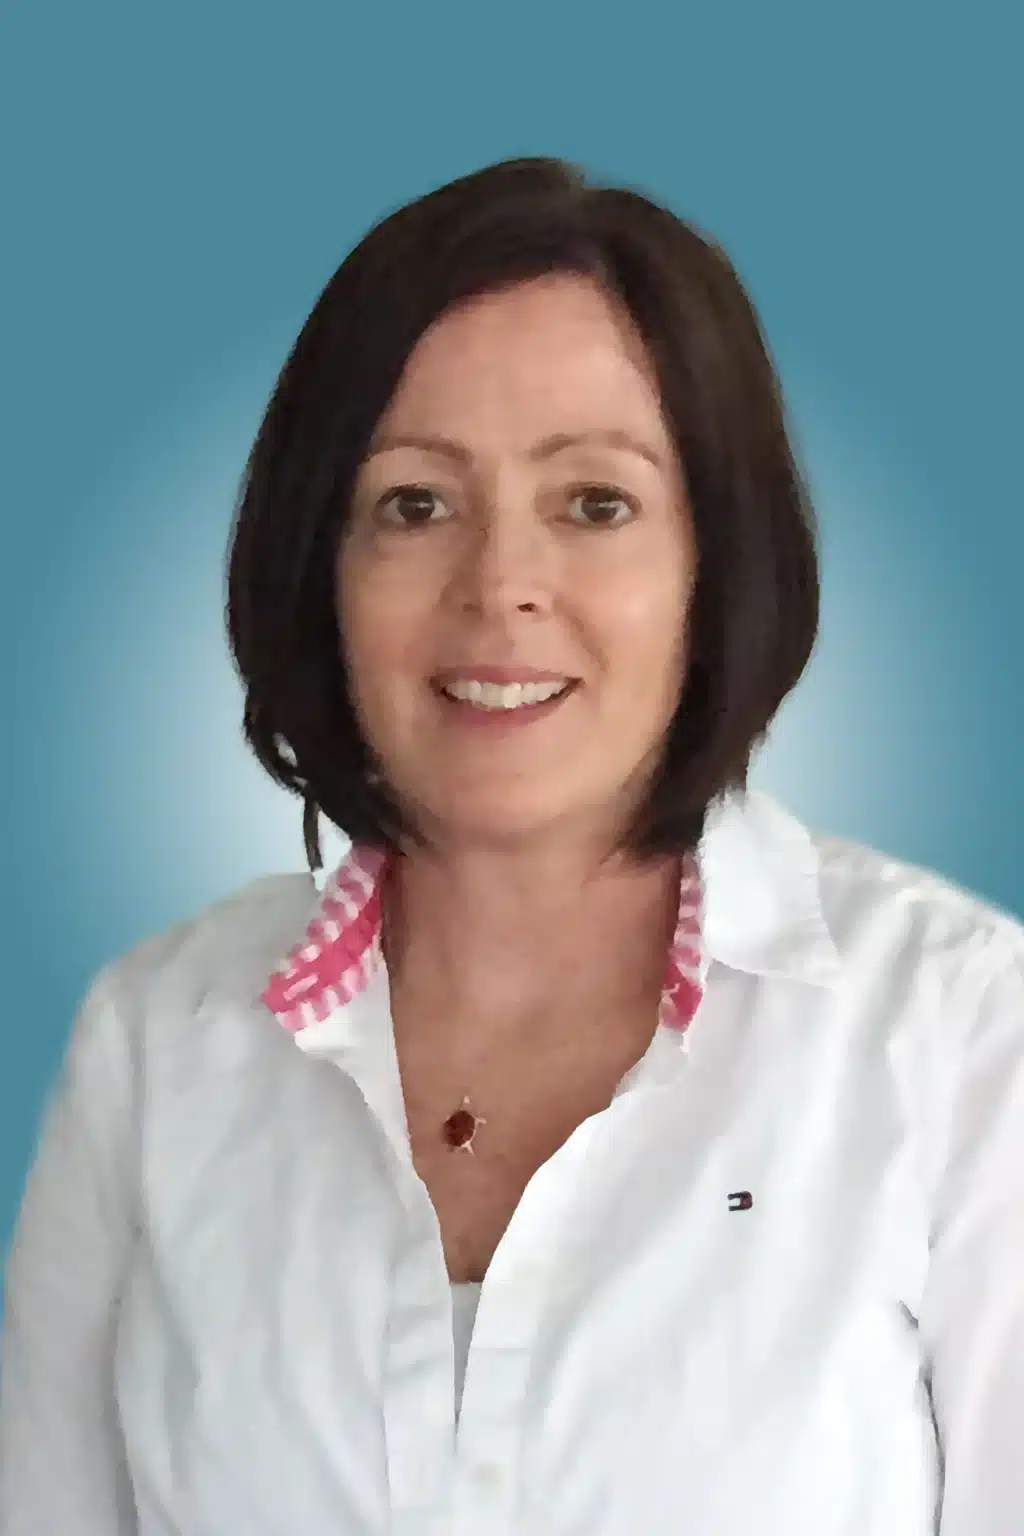 teresa gravelle musculoskeletal clinical specialist